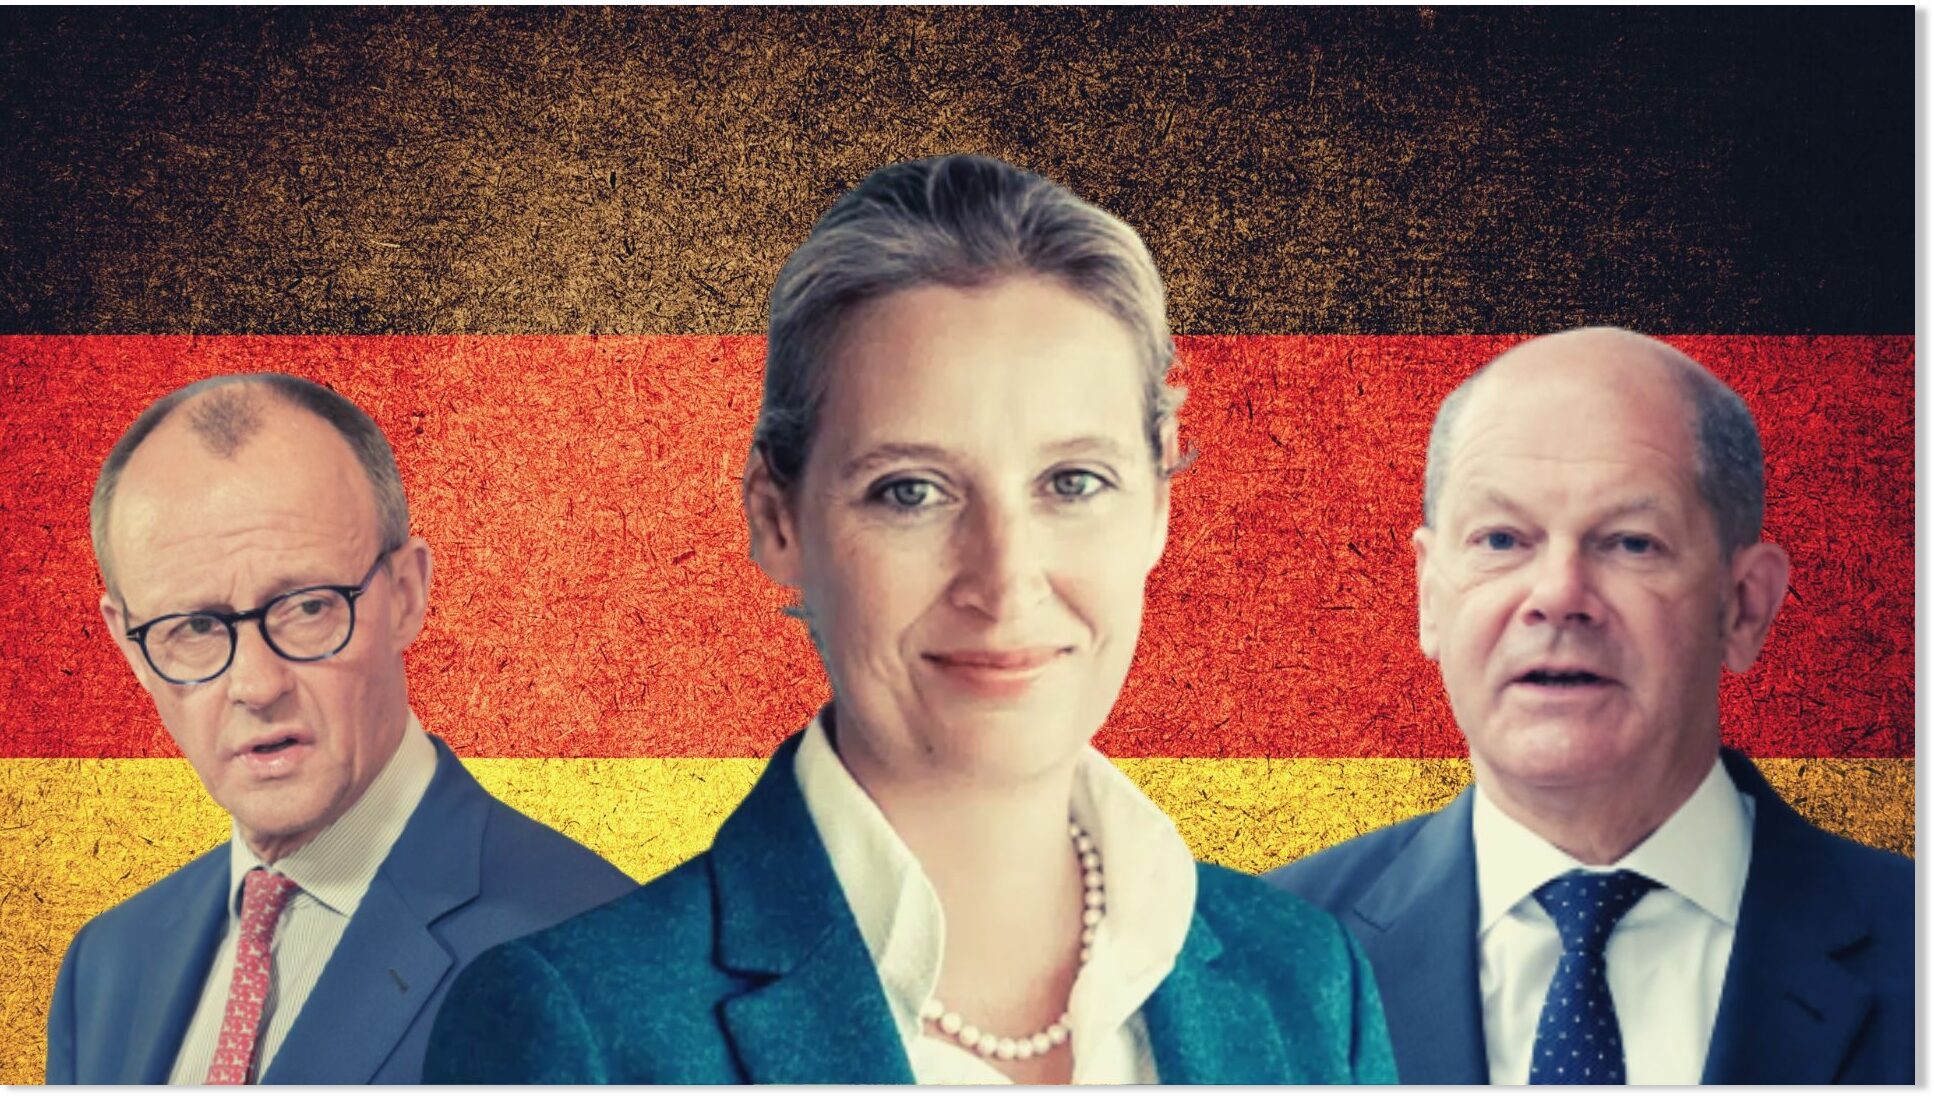 'Germany needs new elections' - Right-populist AfD party's hits record ...